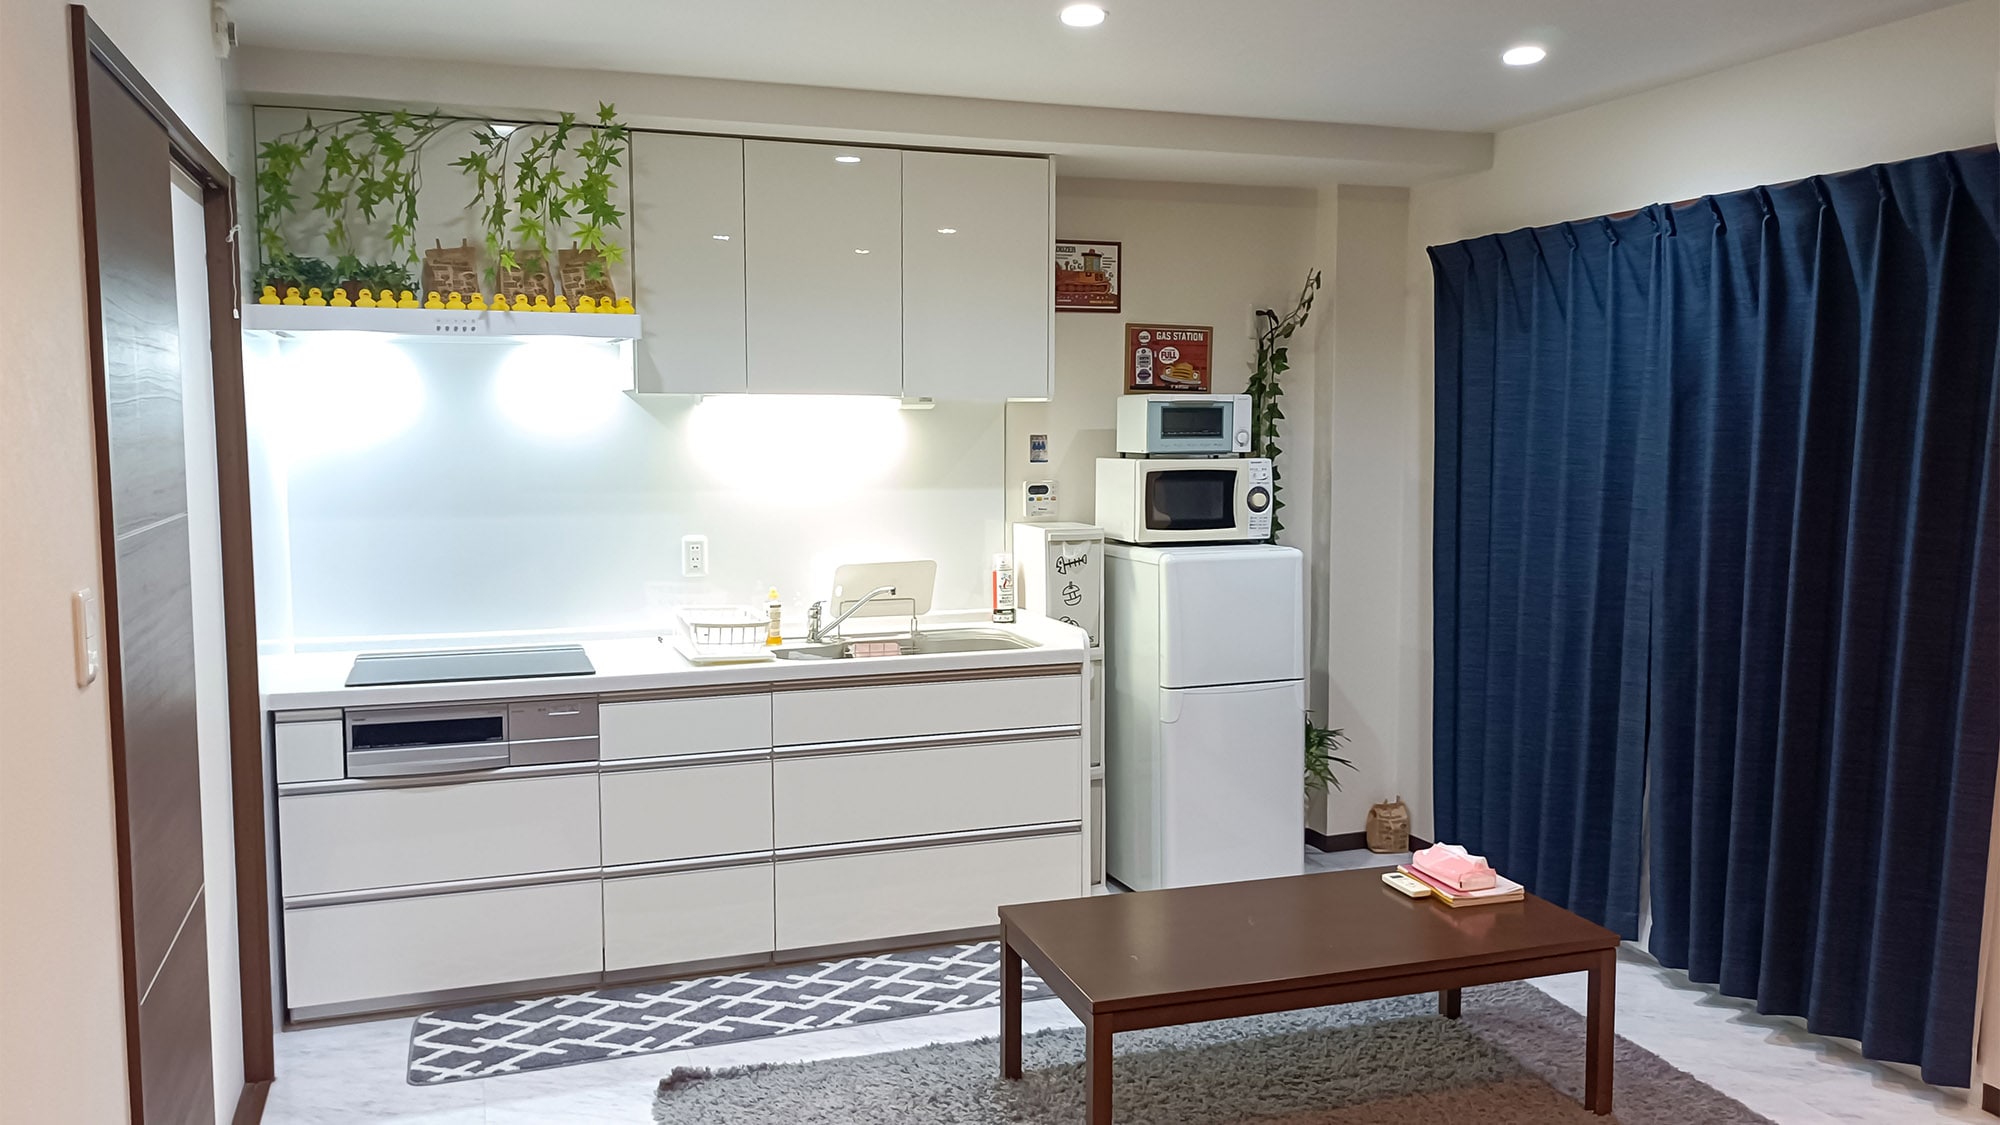 ・ Queen bedroom / with a spacious kitchen that can be cooked by multiple people ★